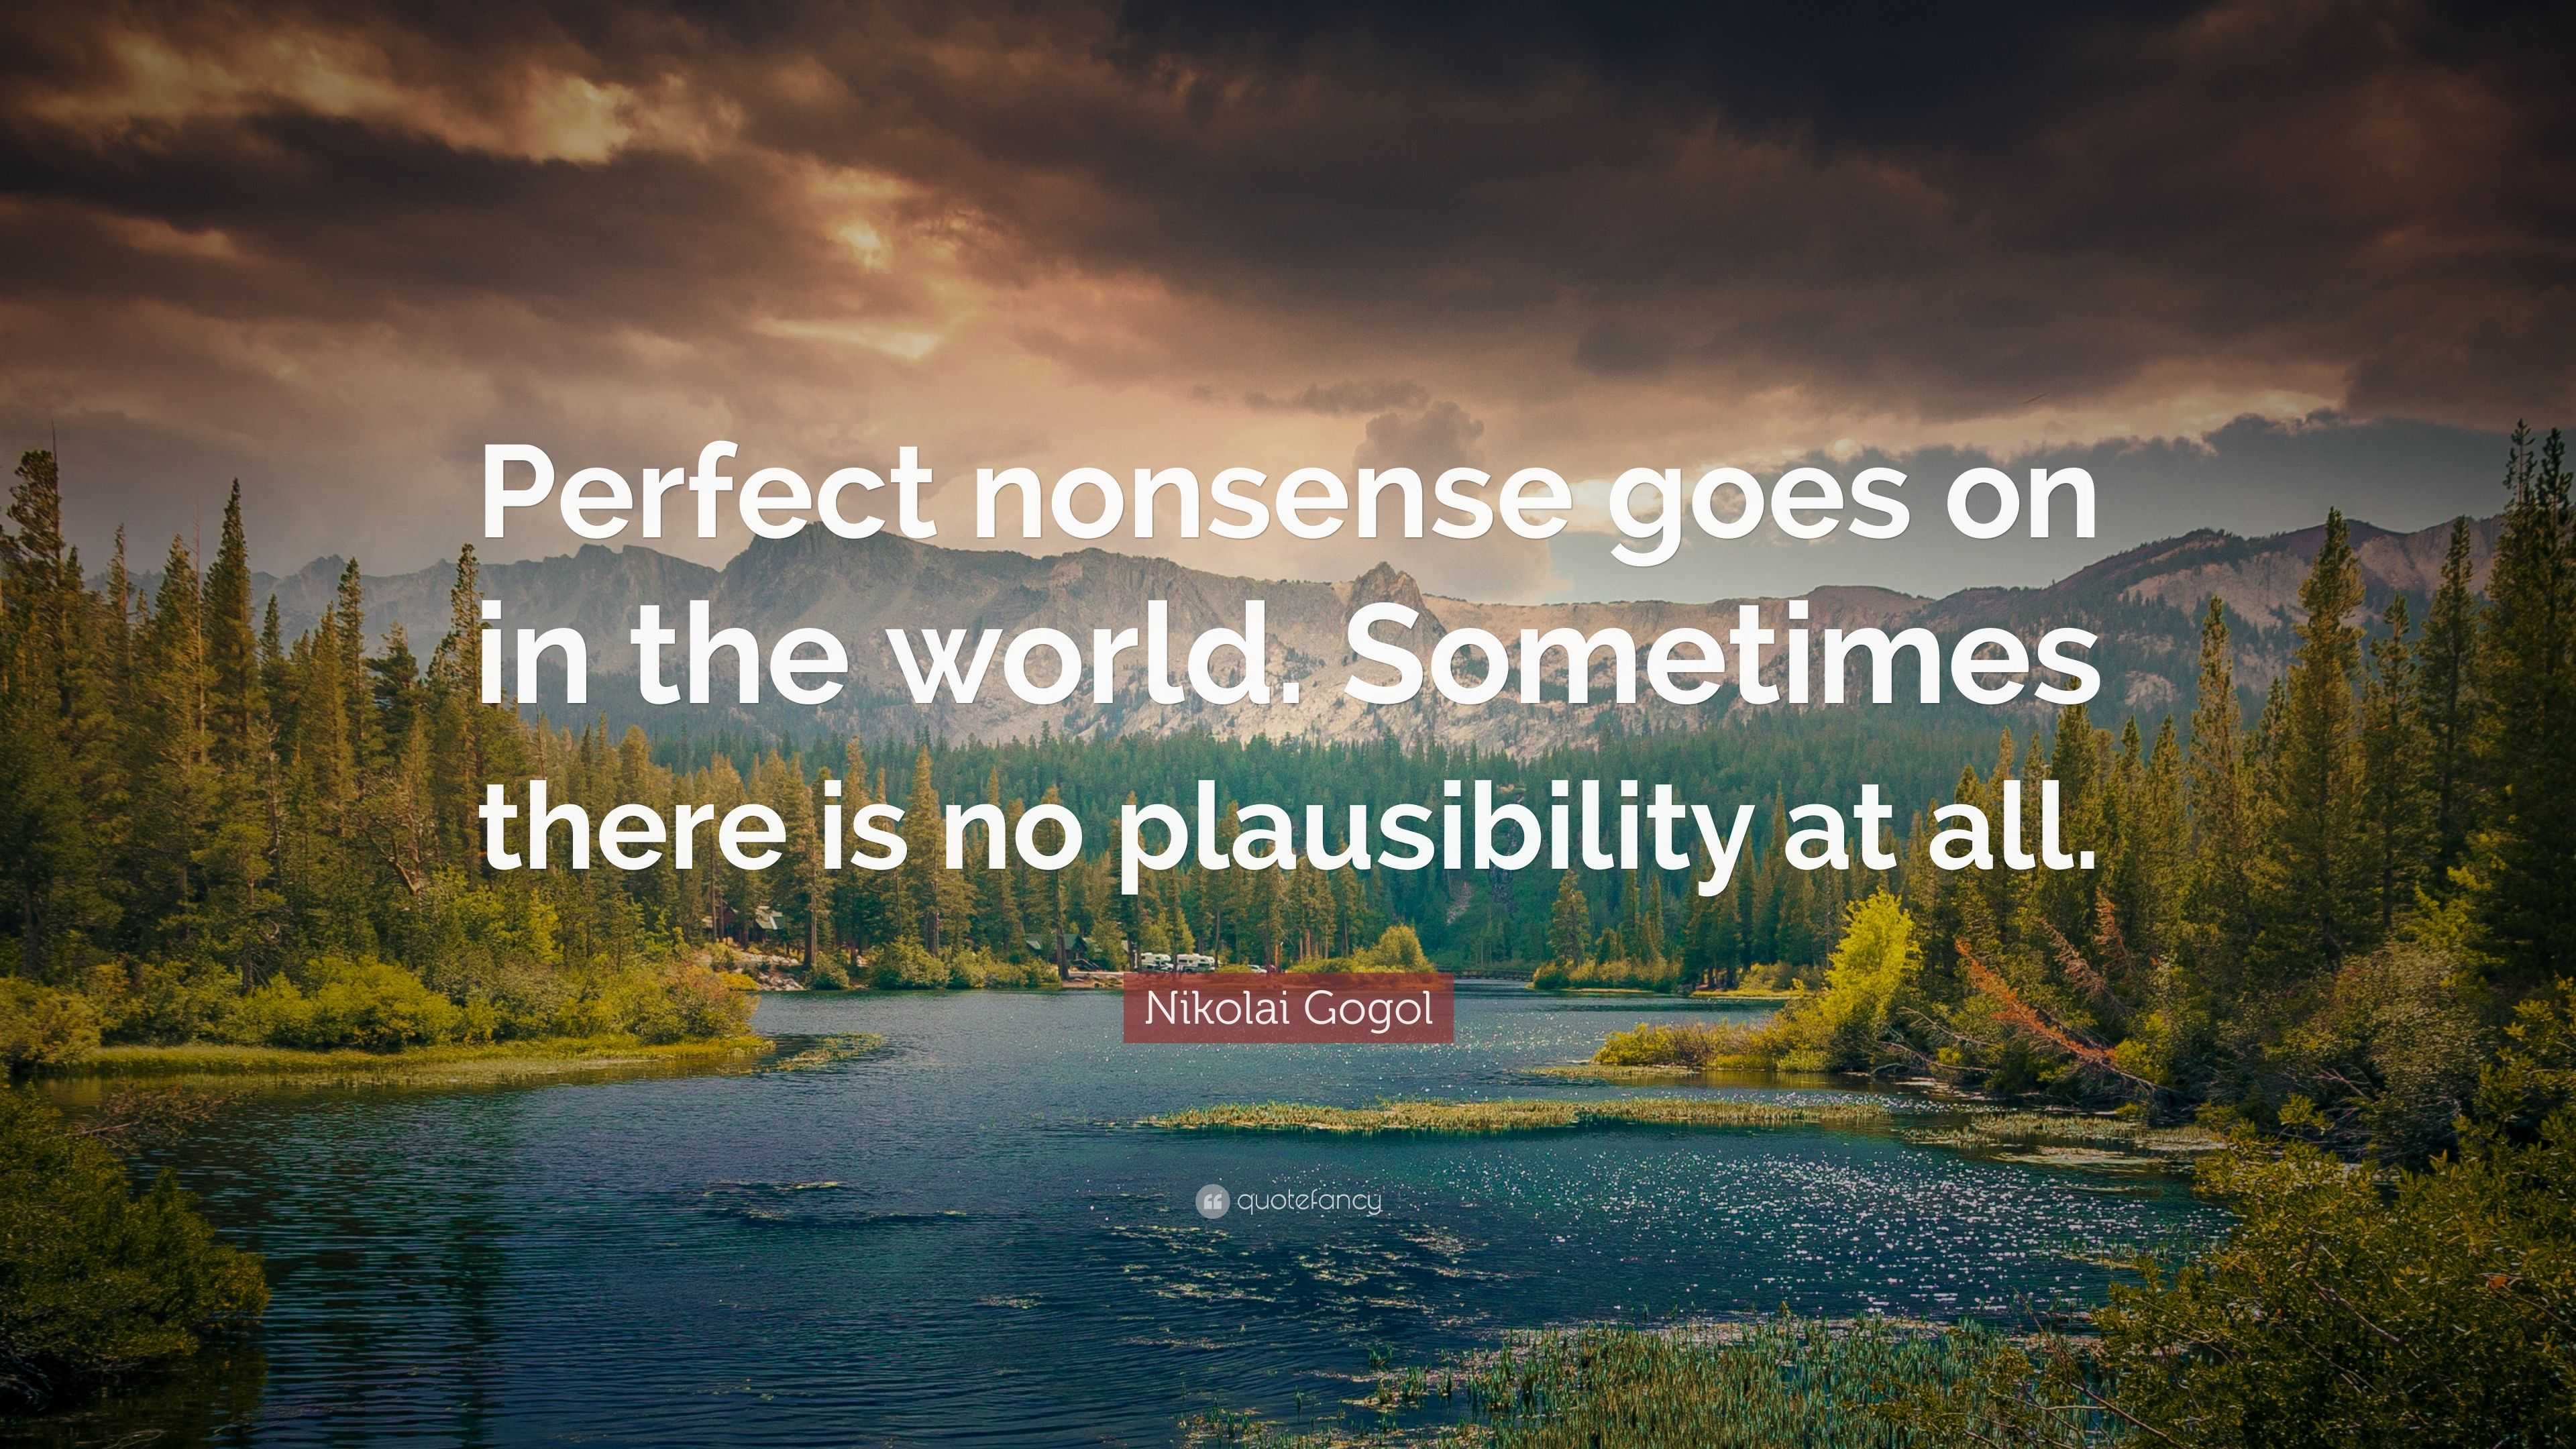 Nikolai Gogol Quote: “Perfect nonsense goes on in the world. Sometimes ...